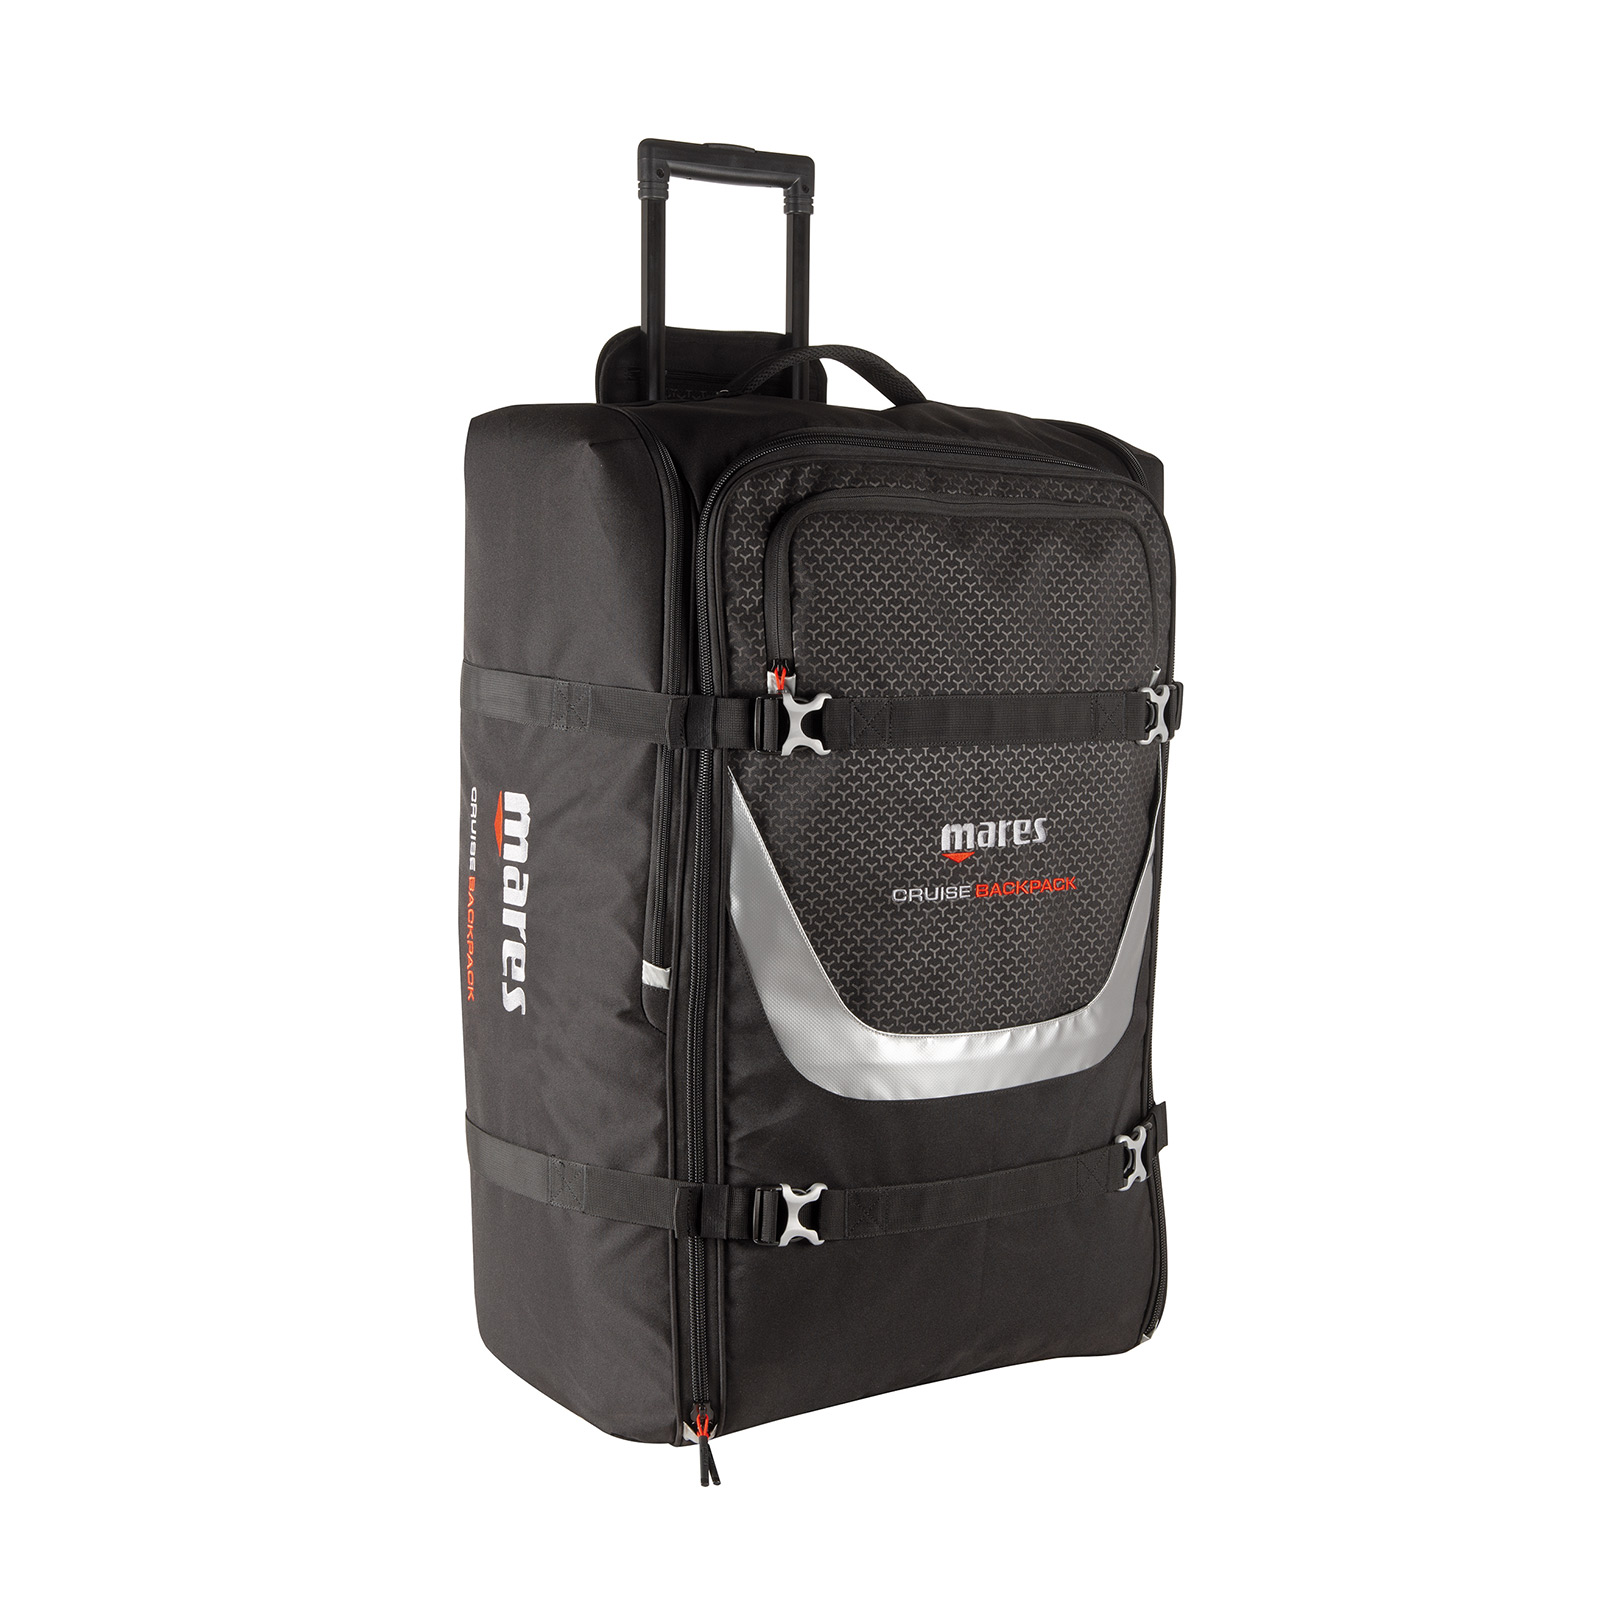 Mares Cruise Backpack Bag